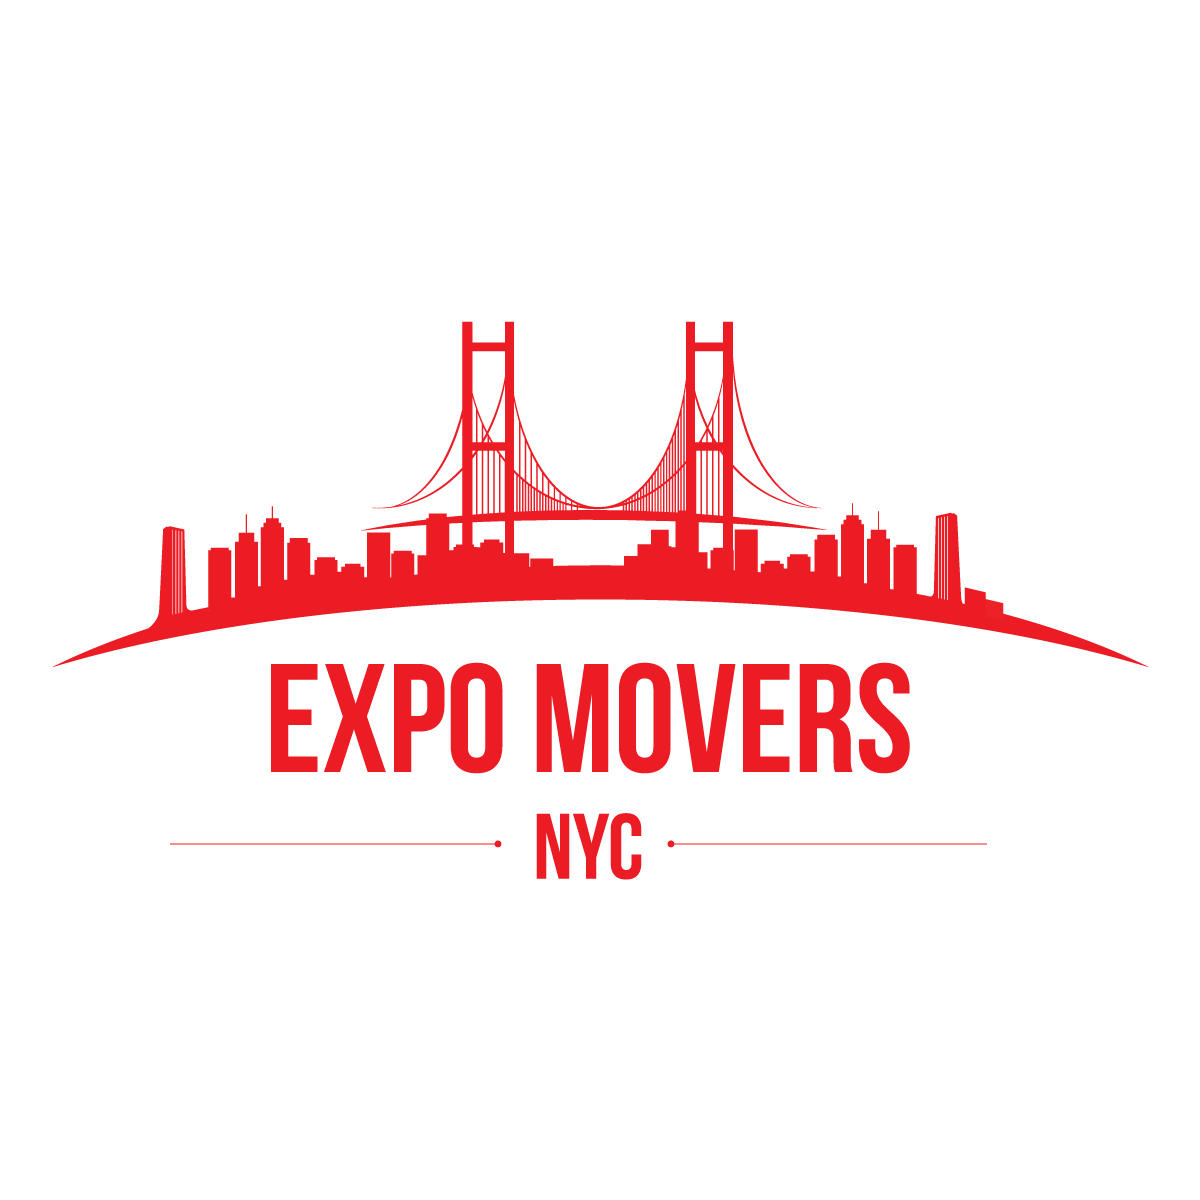 Expo Movers and Storage